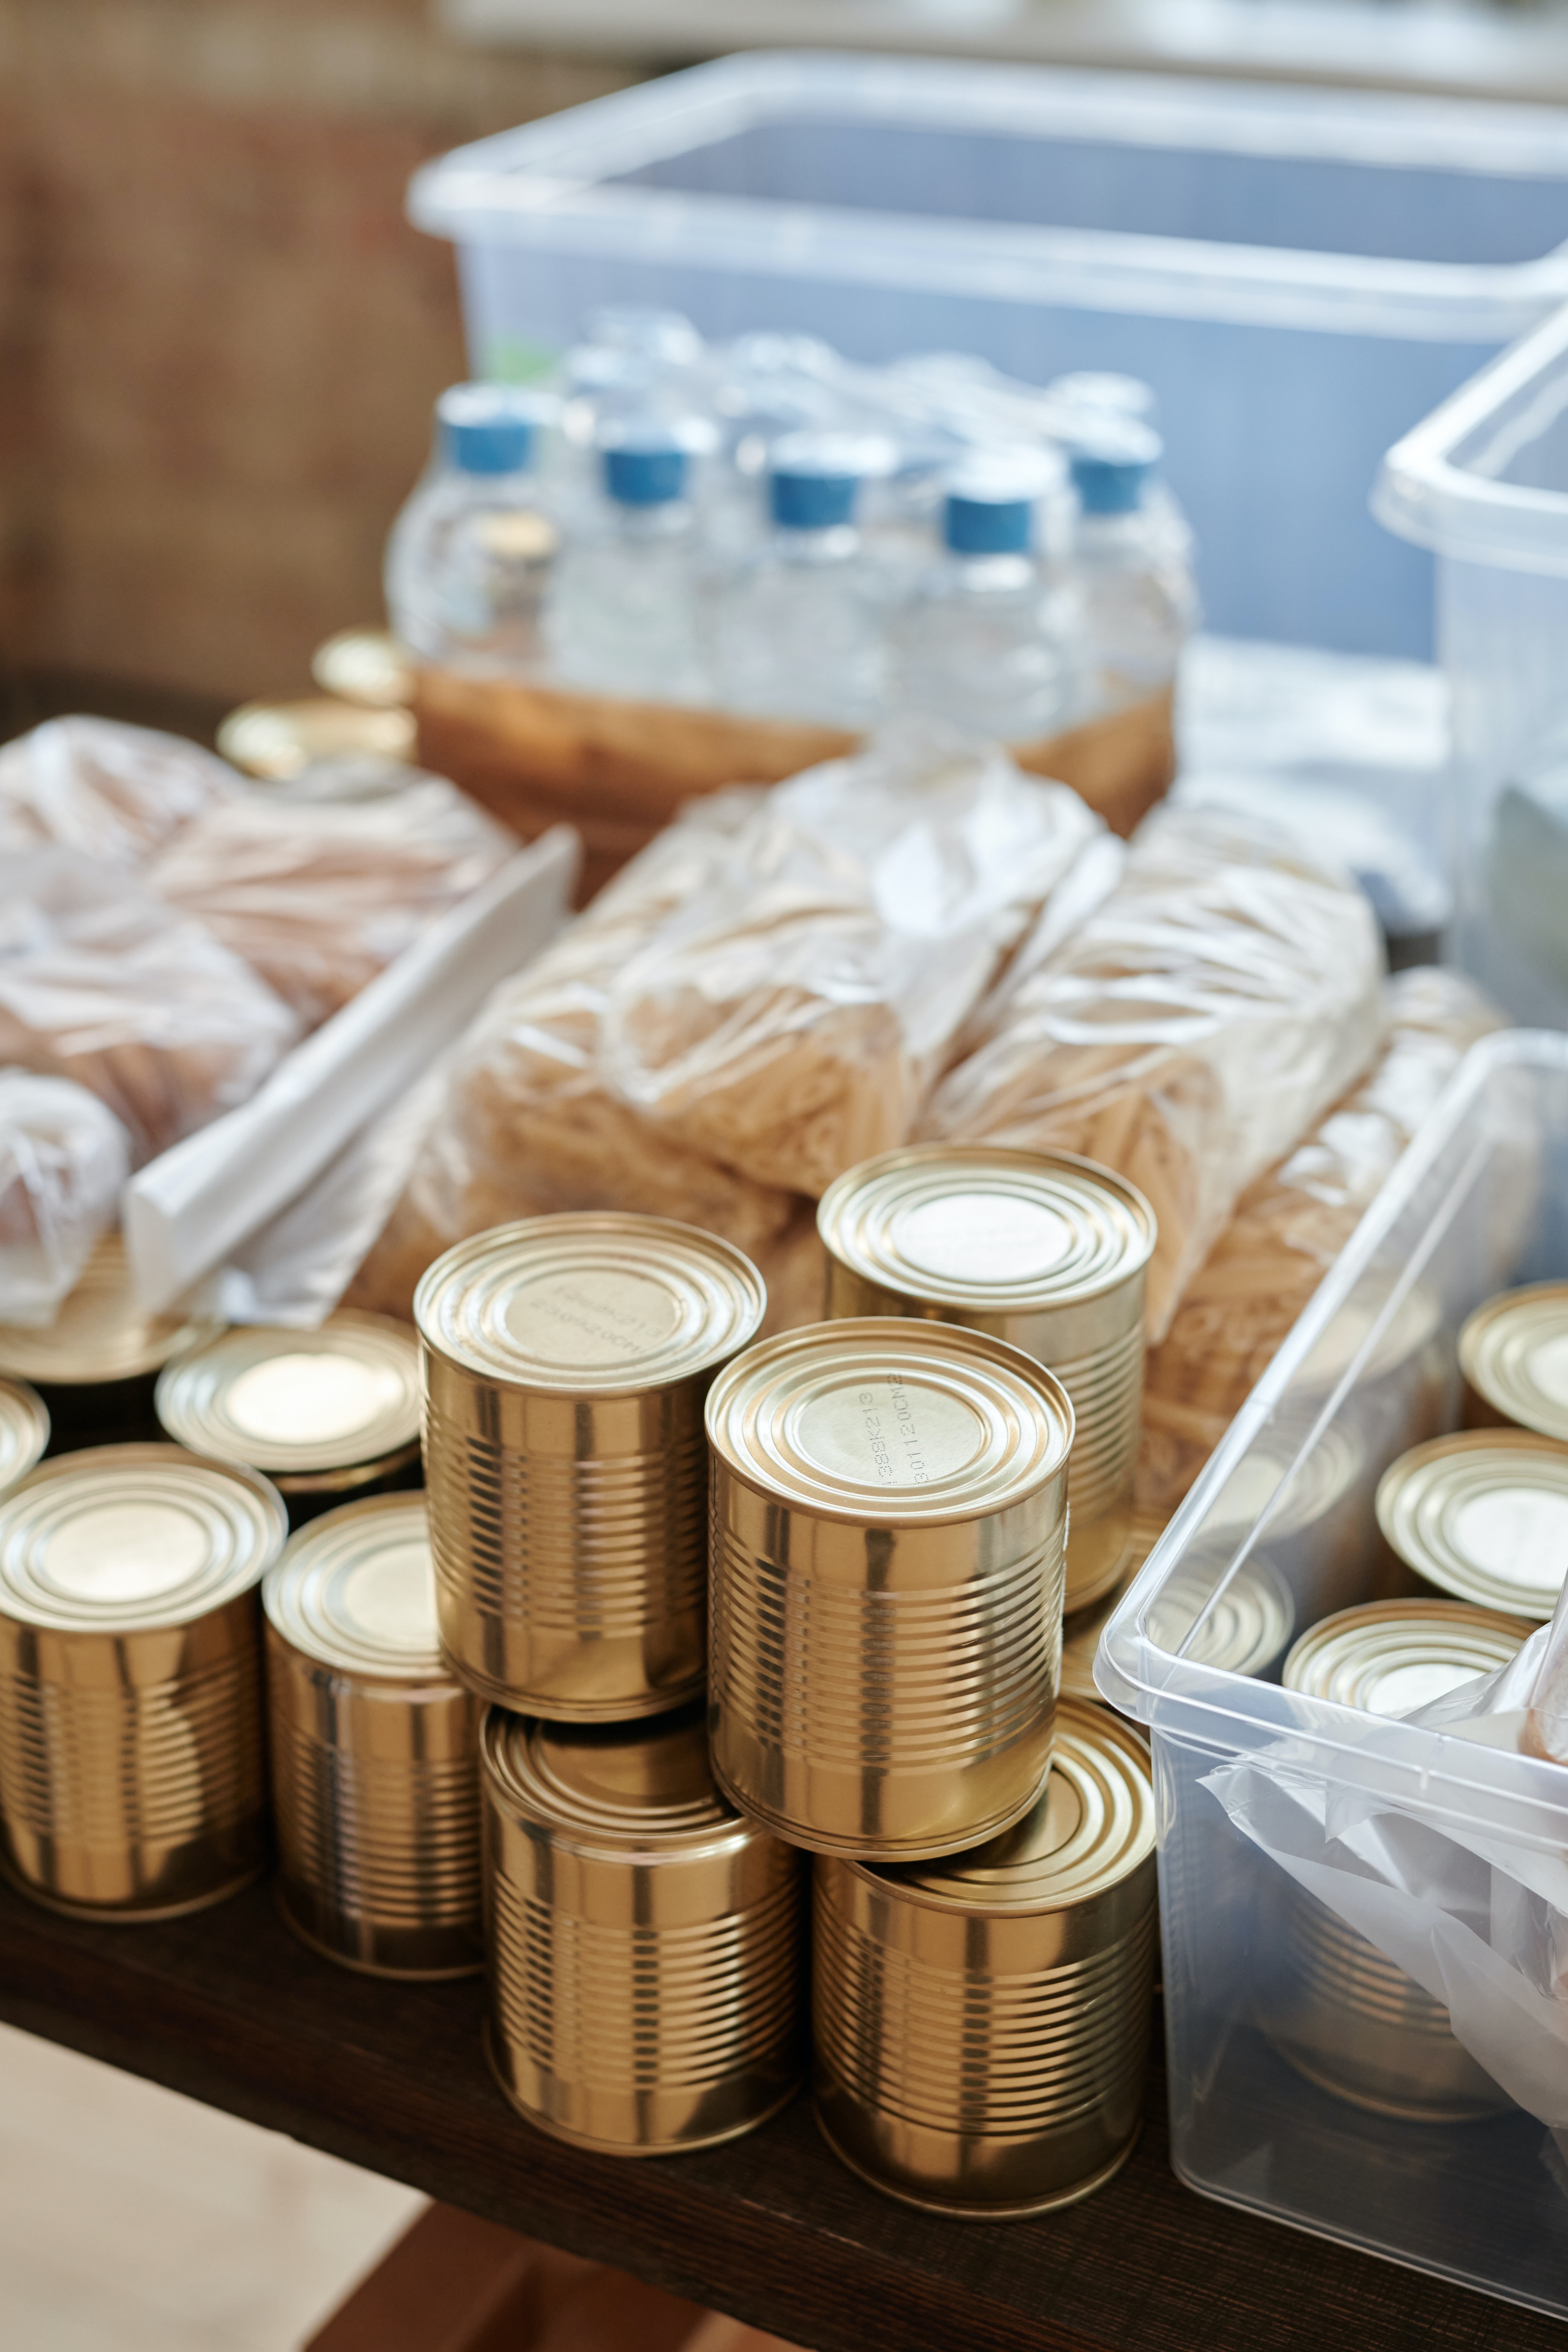 rv packing tips shows non perishable canned food and bottled water 